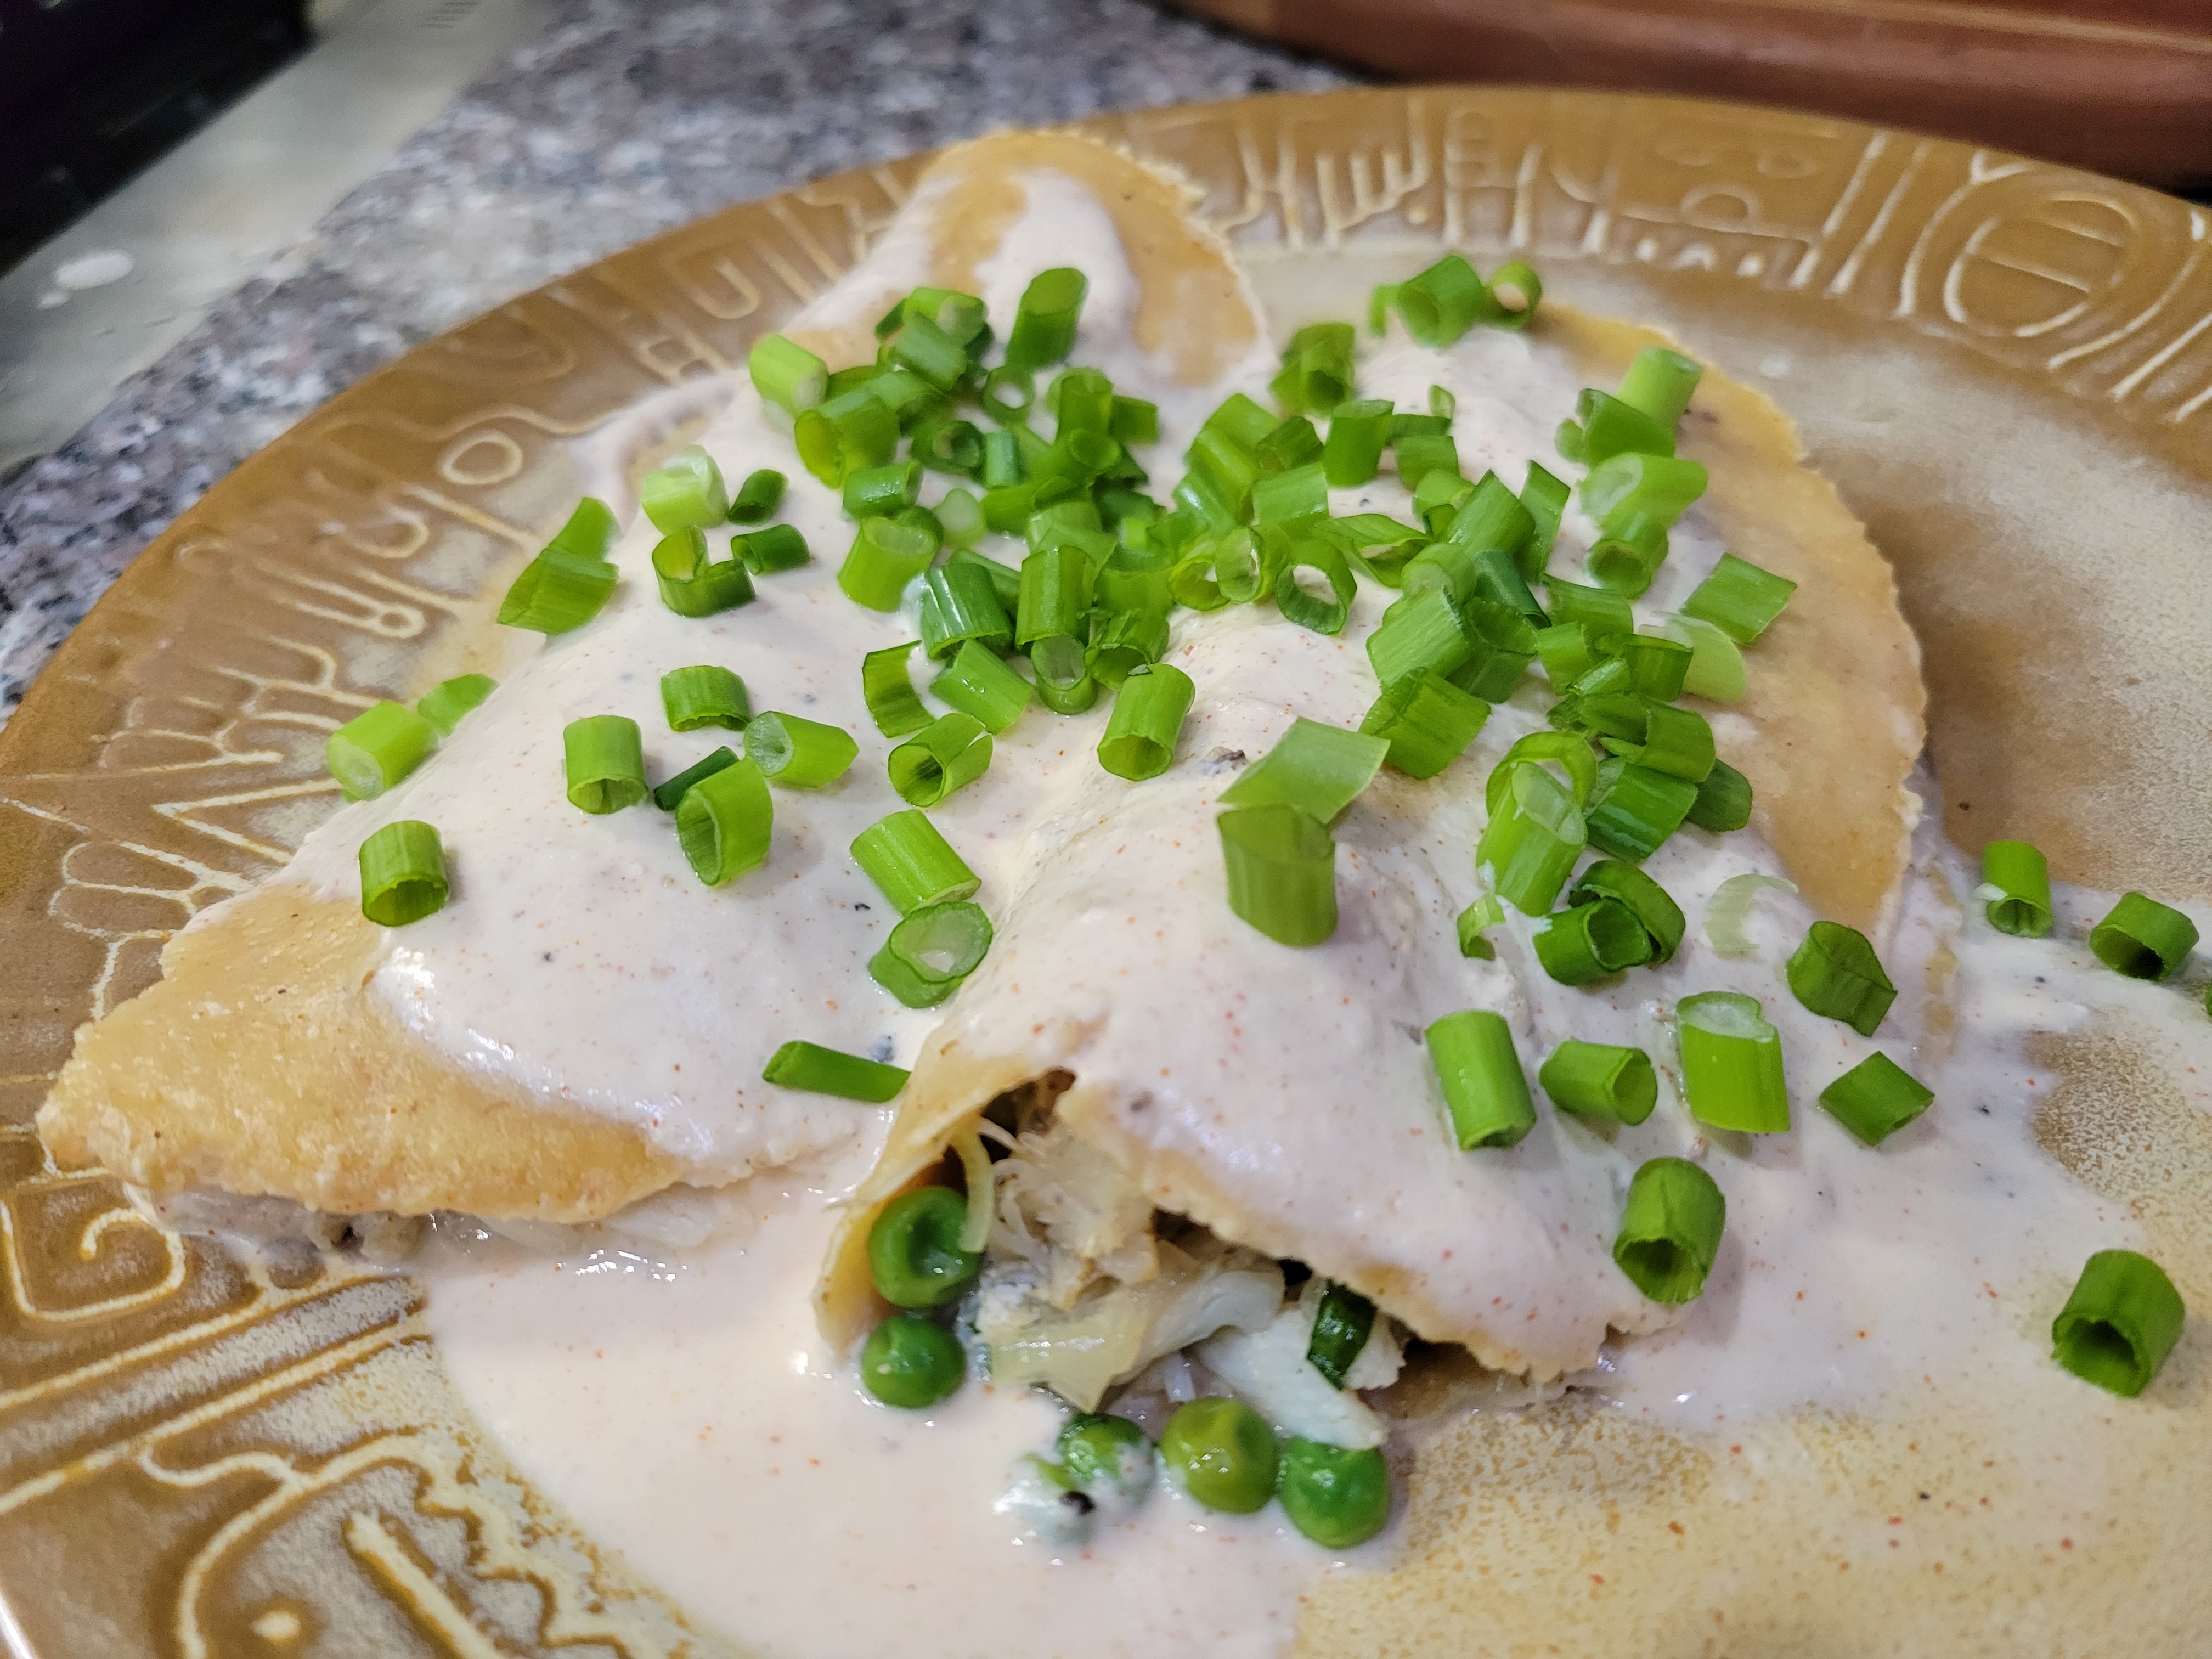 two folded-over enchiladas, coated in a thick cream sauce, filled with crab and peas